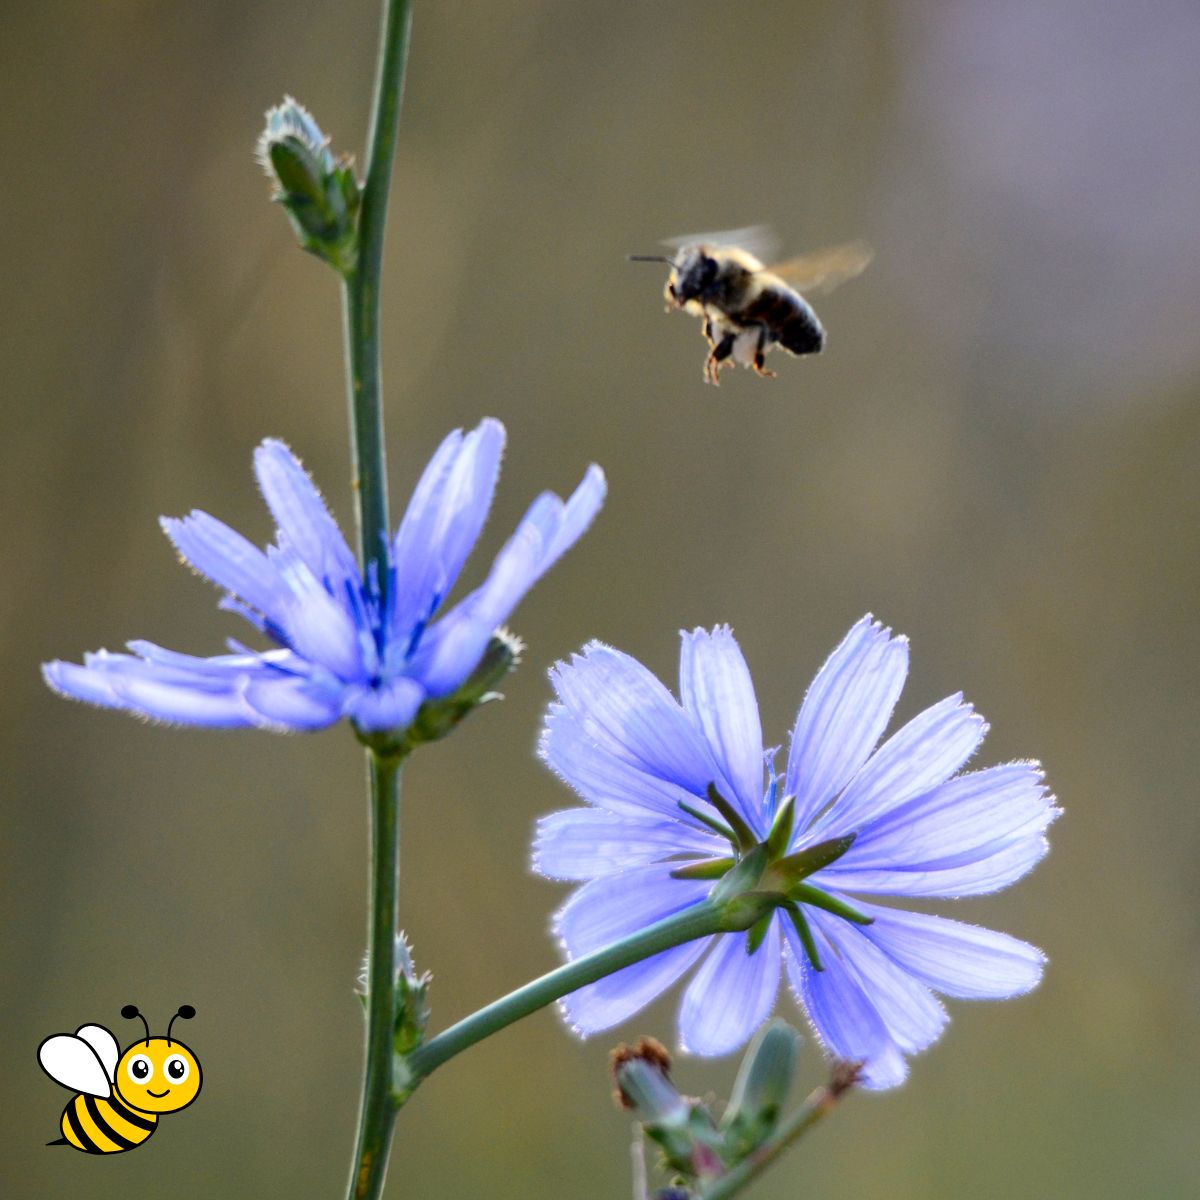 a bee flying towards some chickory flowers